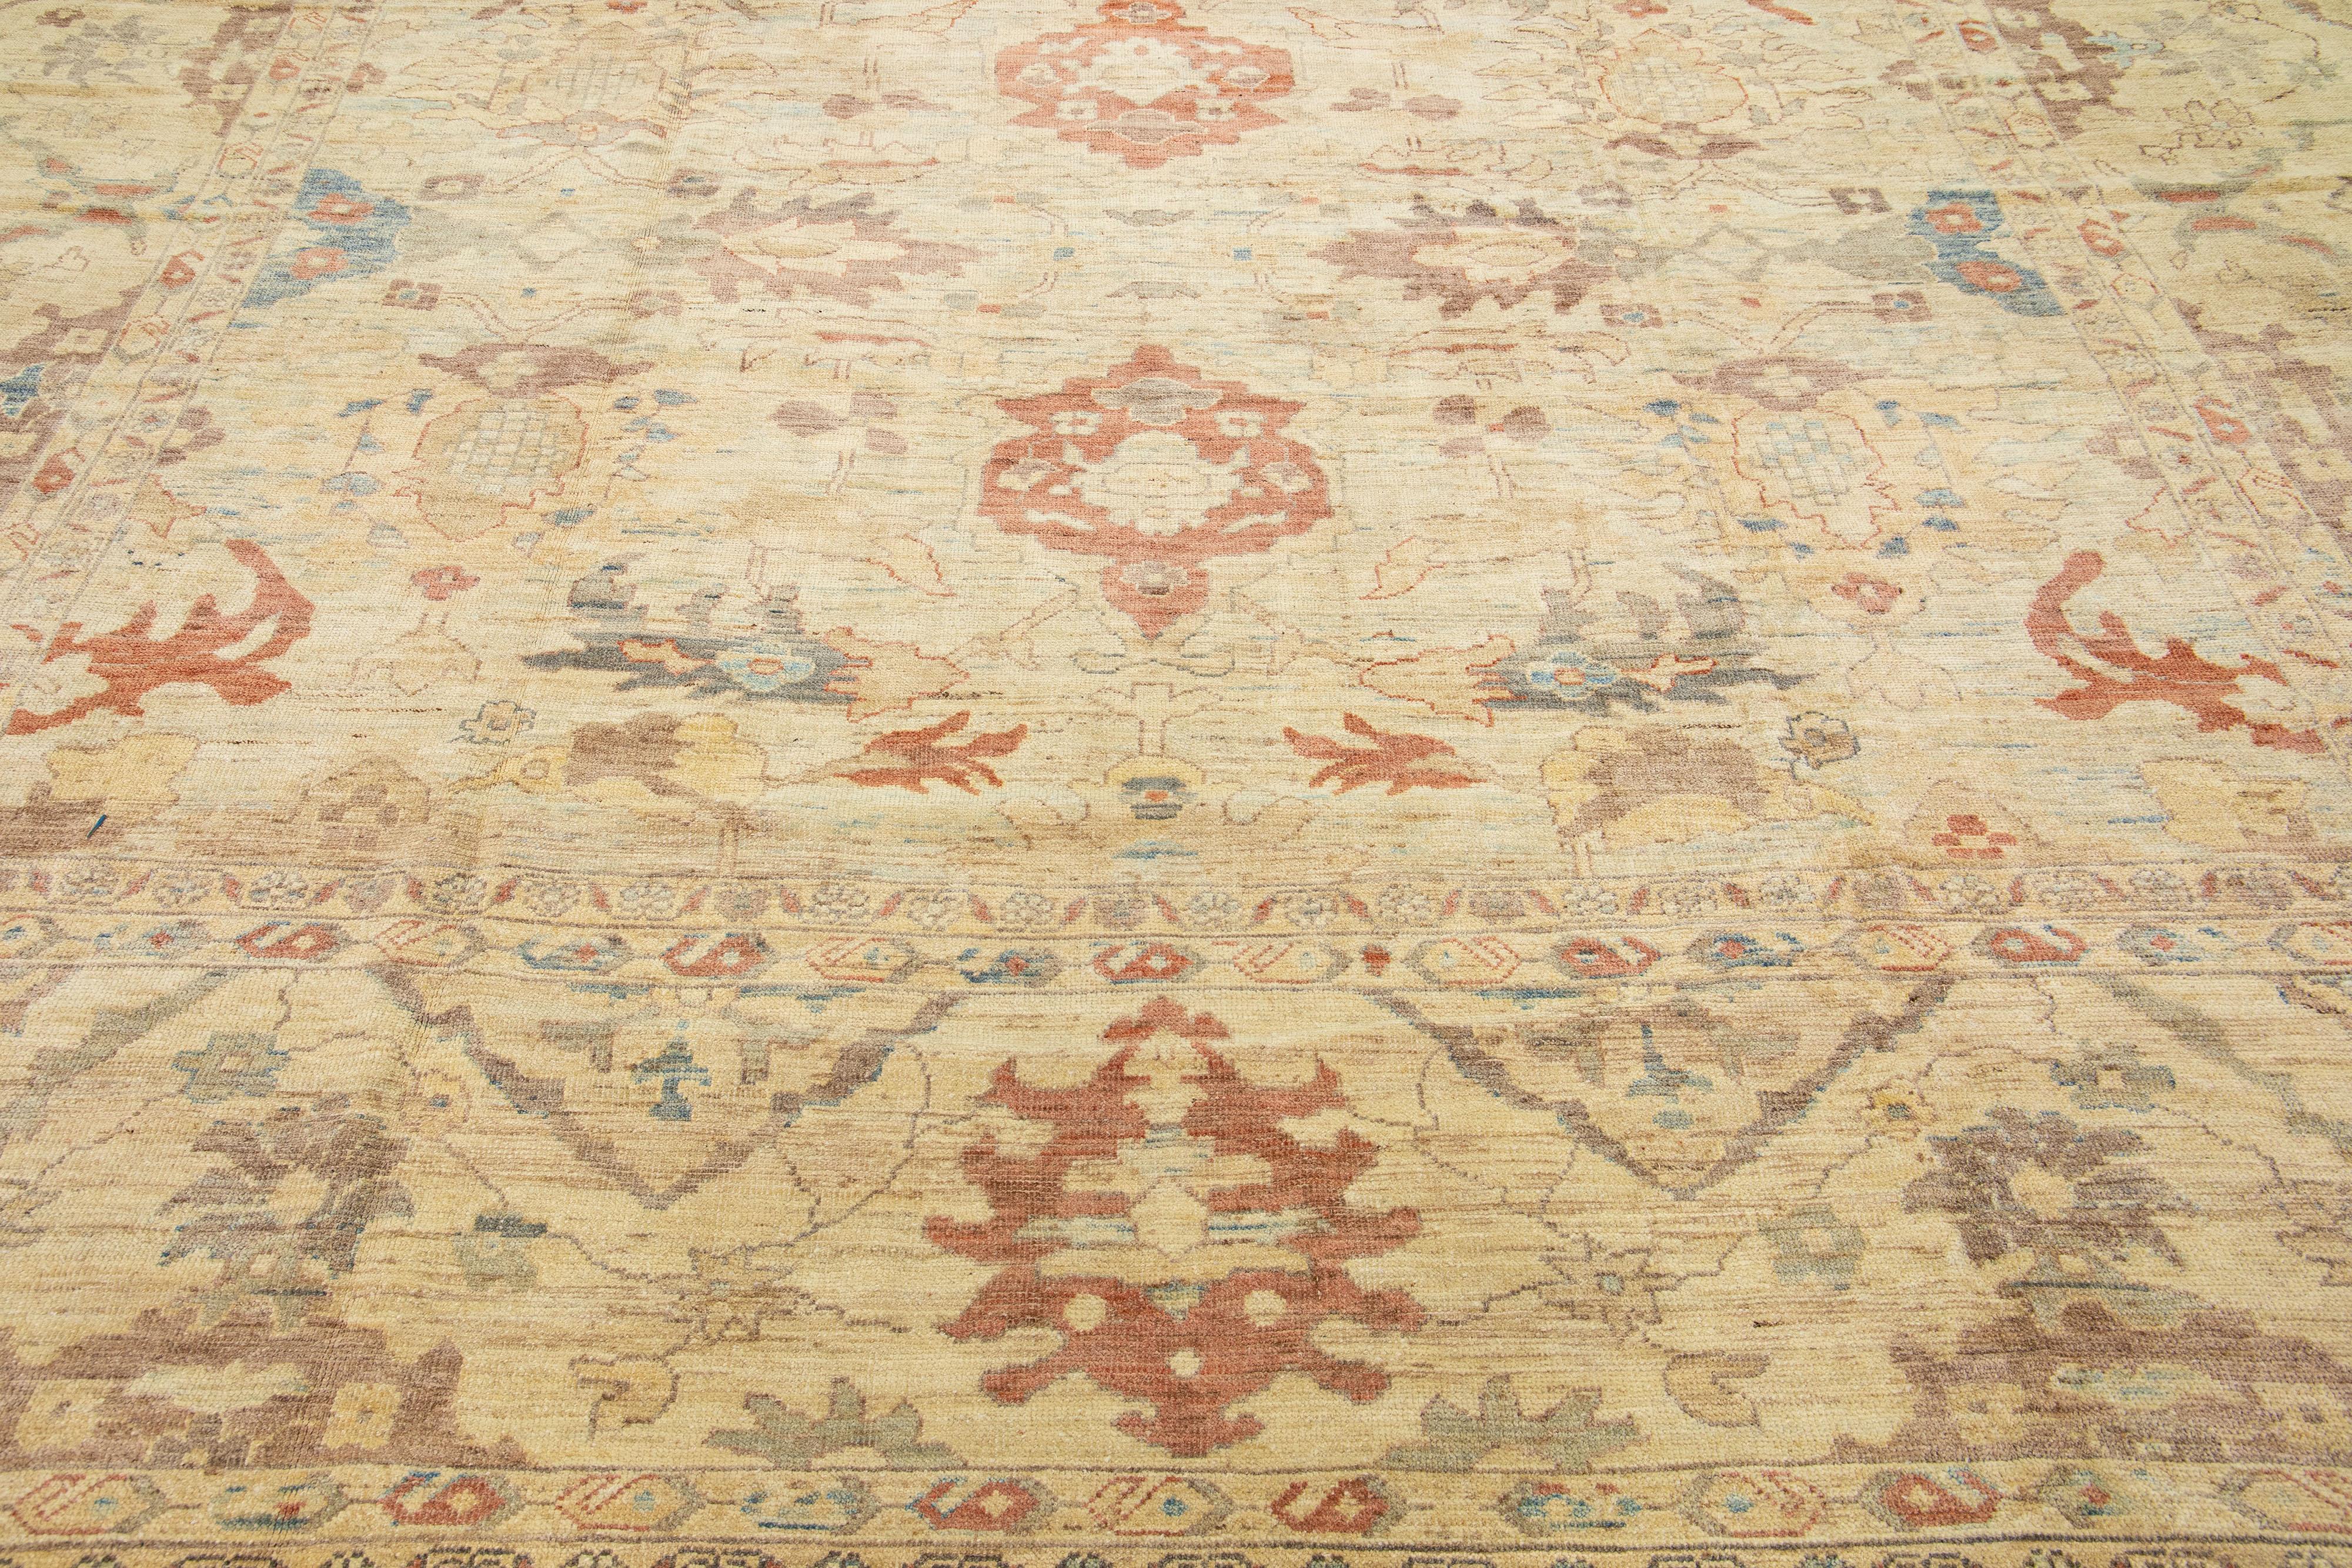 Beautiful modern Sultanabad hand-knotted wool rug with a blue color field. This rug has a designed frame with rust-orange and brown accents in a gorgeous all-over floral design.

This rug measures: 13' x 18'7